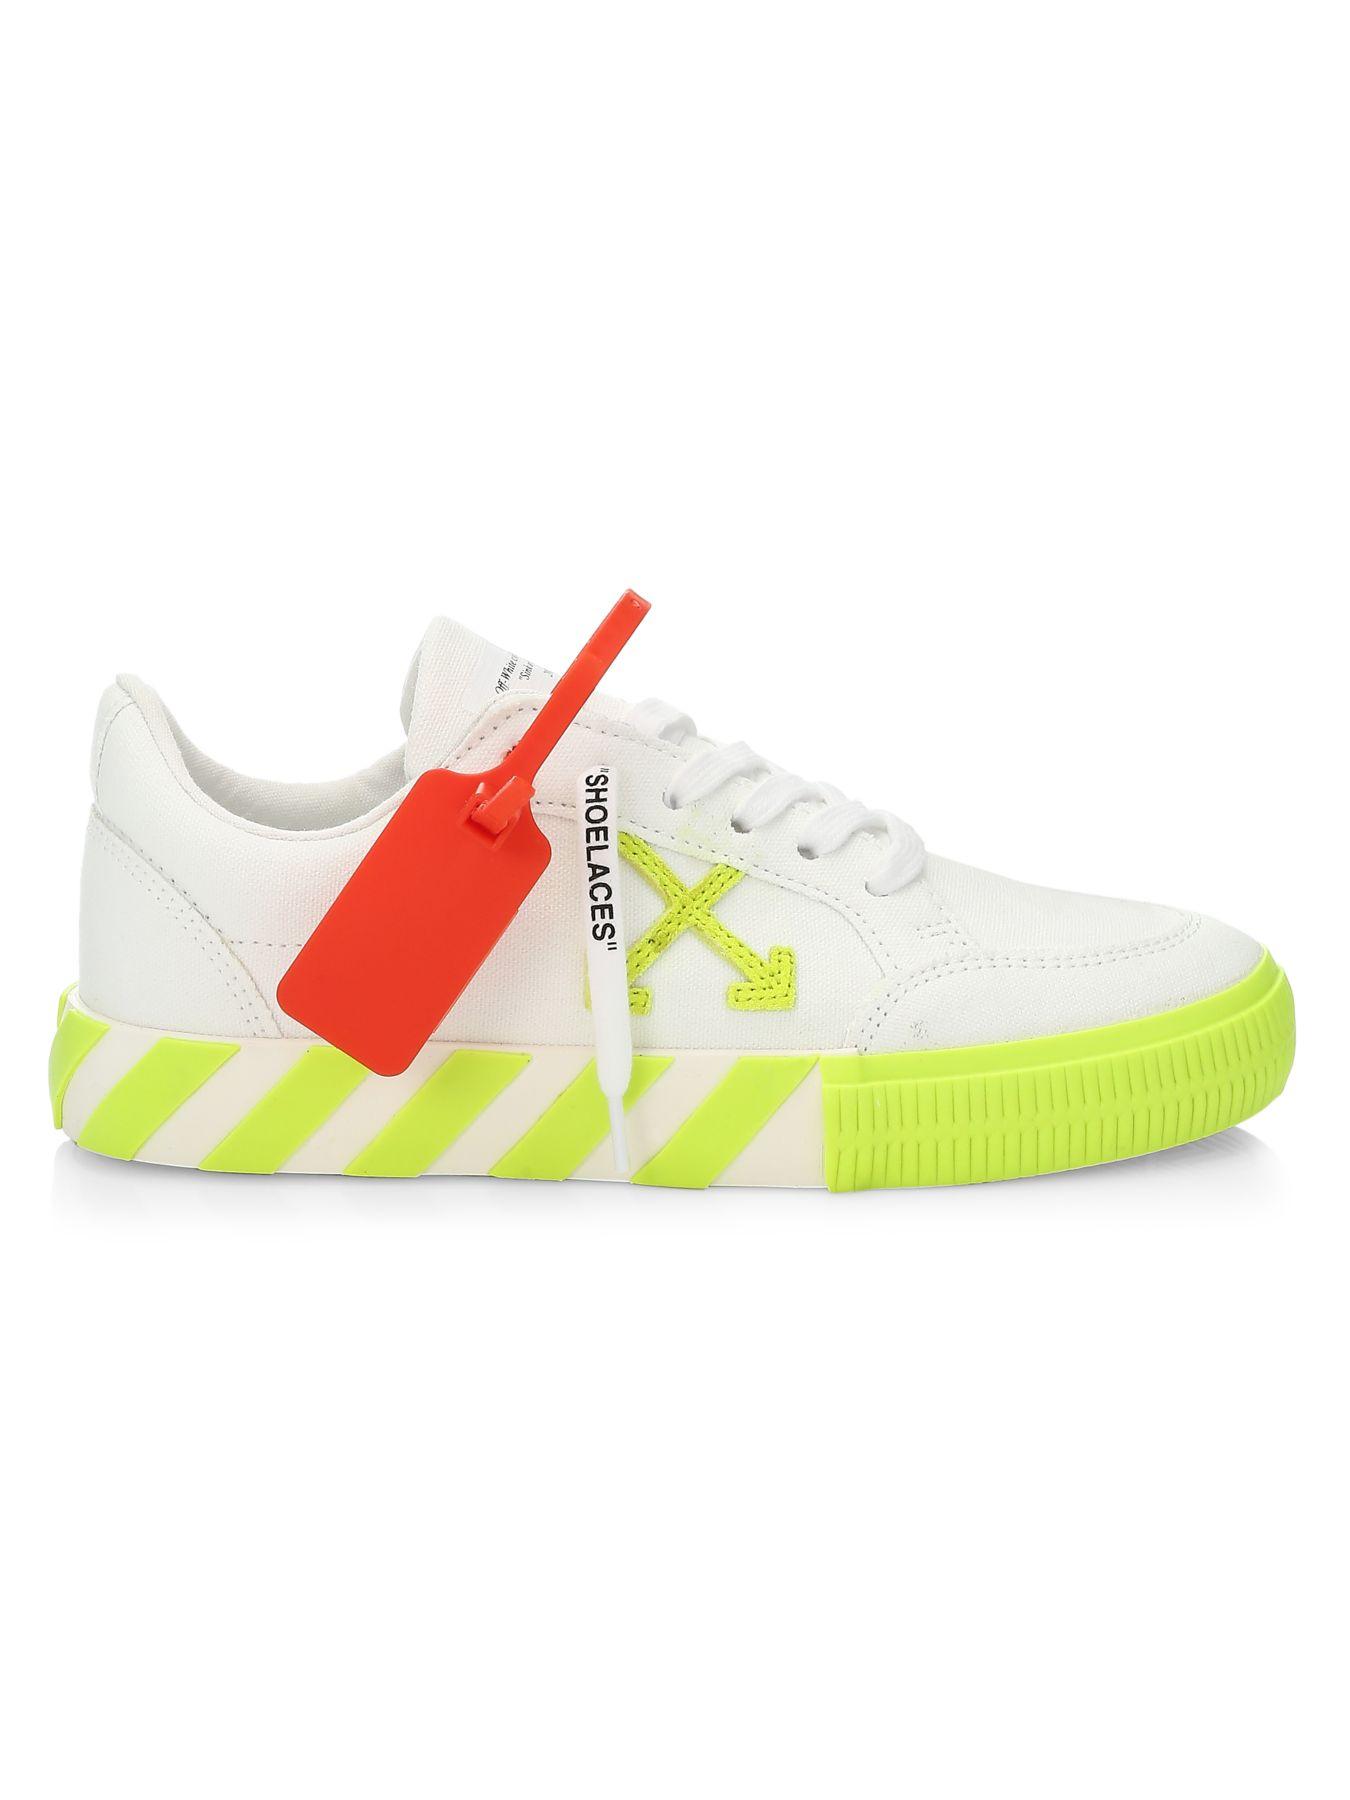 Off-White c/o Virgil Abloh Arrow Low-top Neon Canvas Sneakers - Lyst